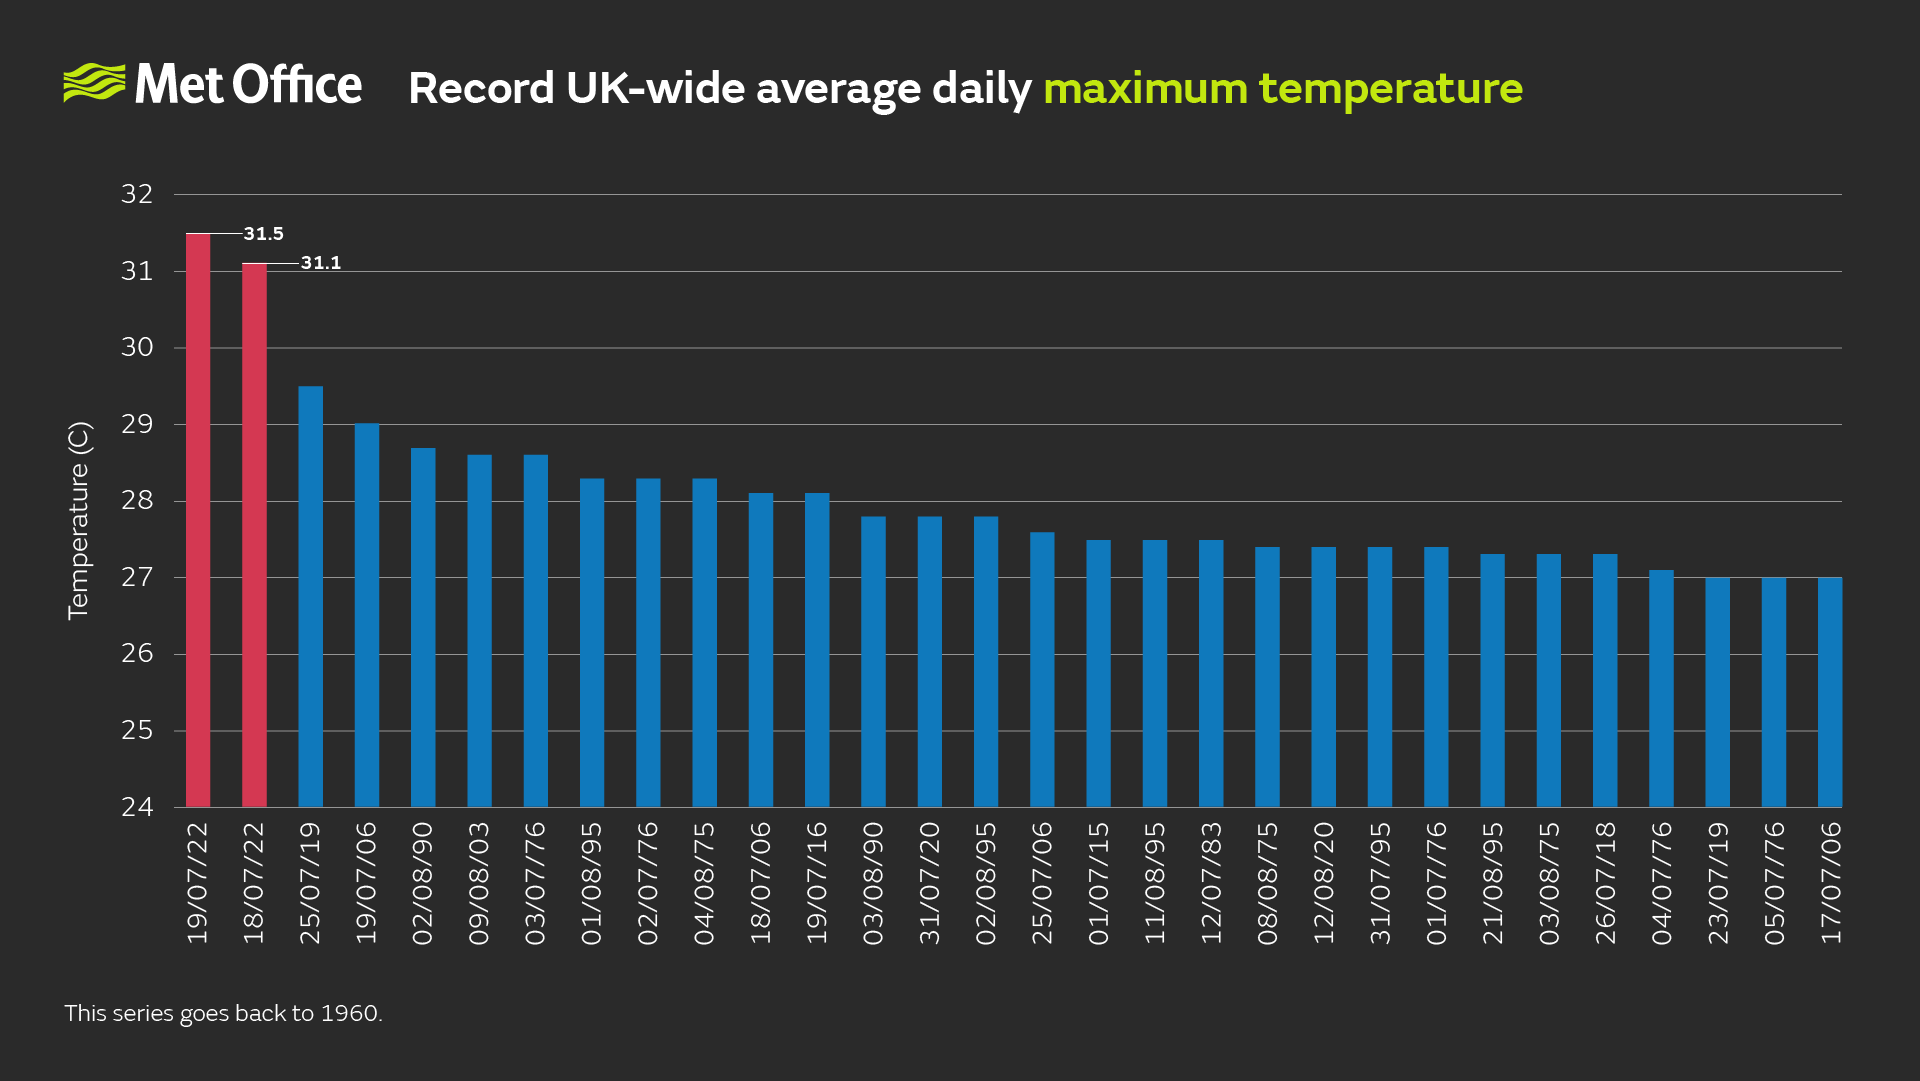 The graph shows record UK-wide average daily maximum temperatures. The chart shows 18 and 19 July had the average highest daily max temp since 1960.